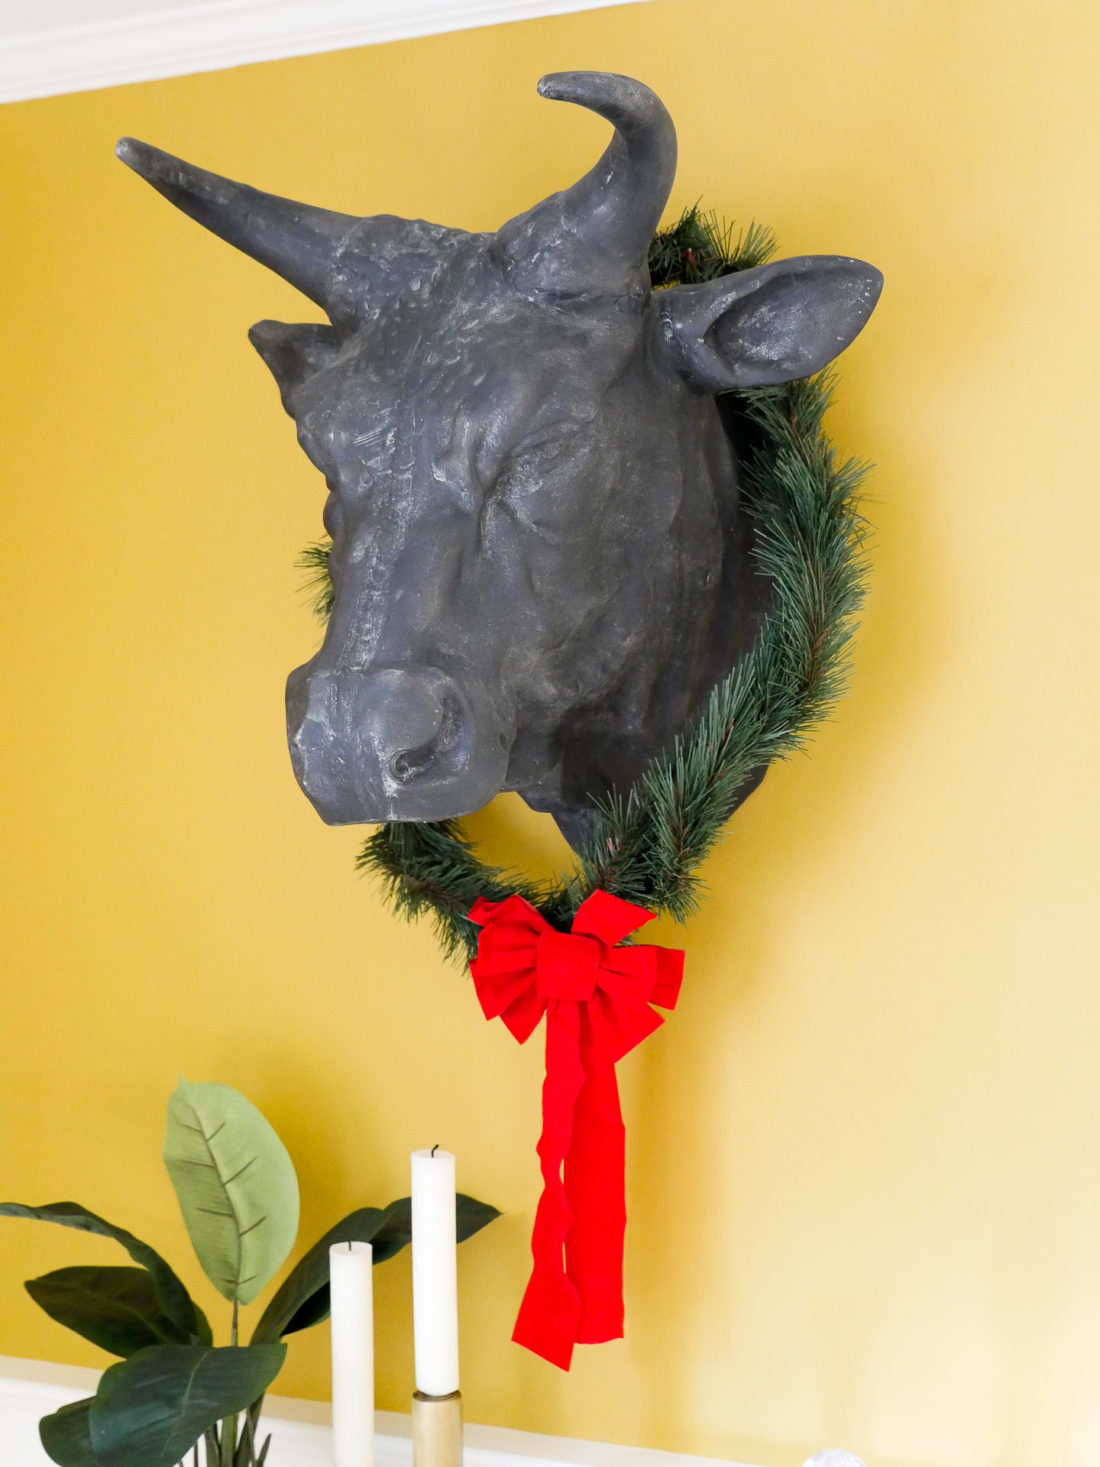 An iron bull's head decorated for Christmas